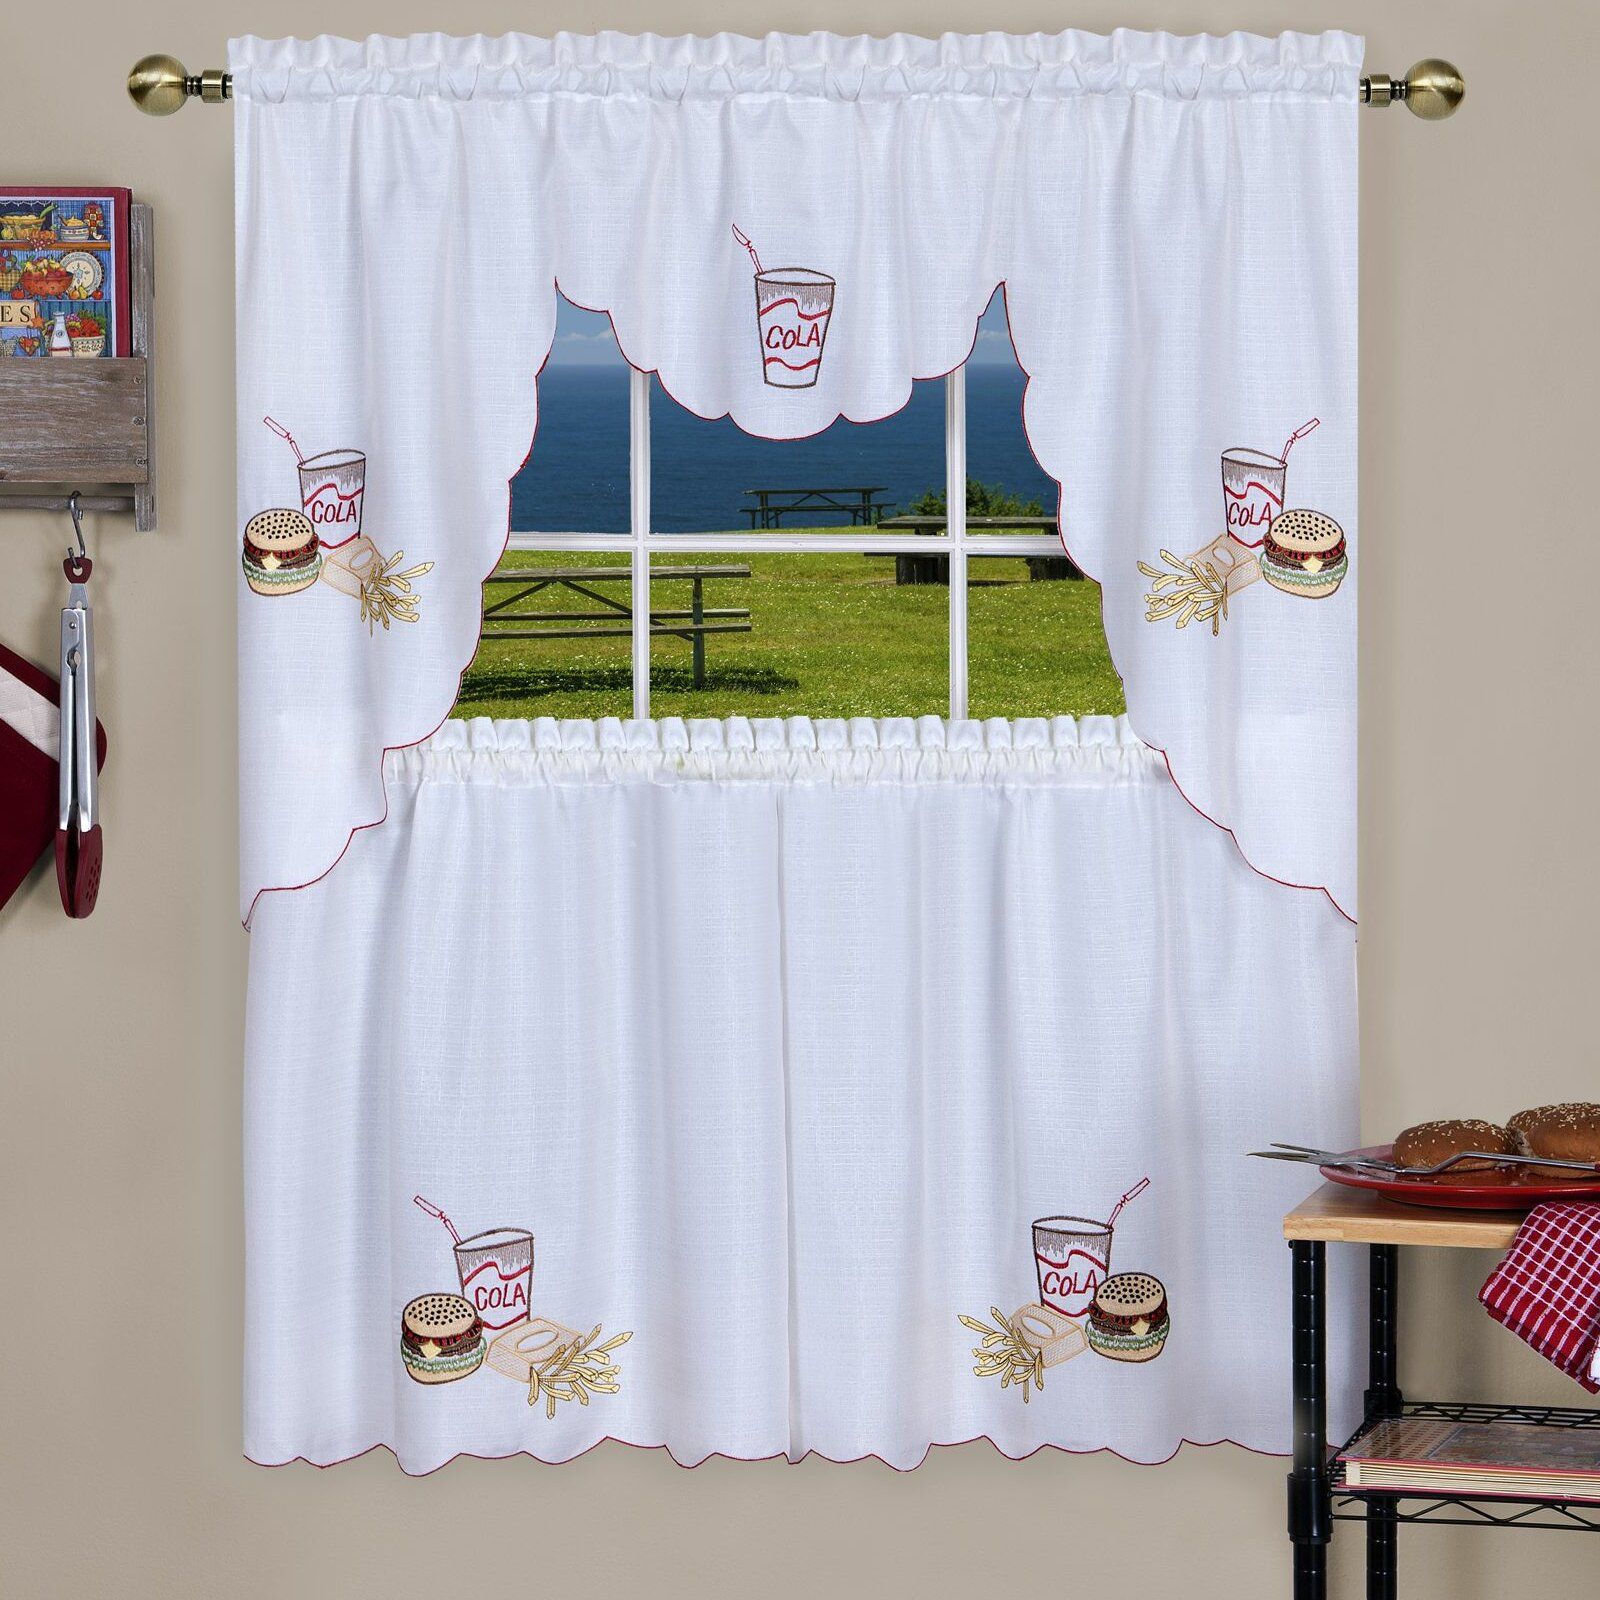 Emsley Tier Swag Kitchen Curtain Set Pertaining To Multicolored Printed Curtain Tier And Swag Sets (View 11 of 20)